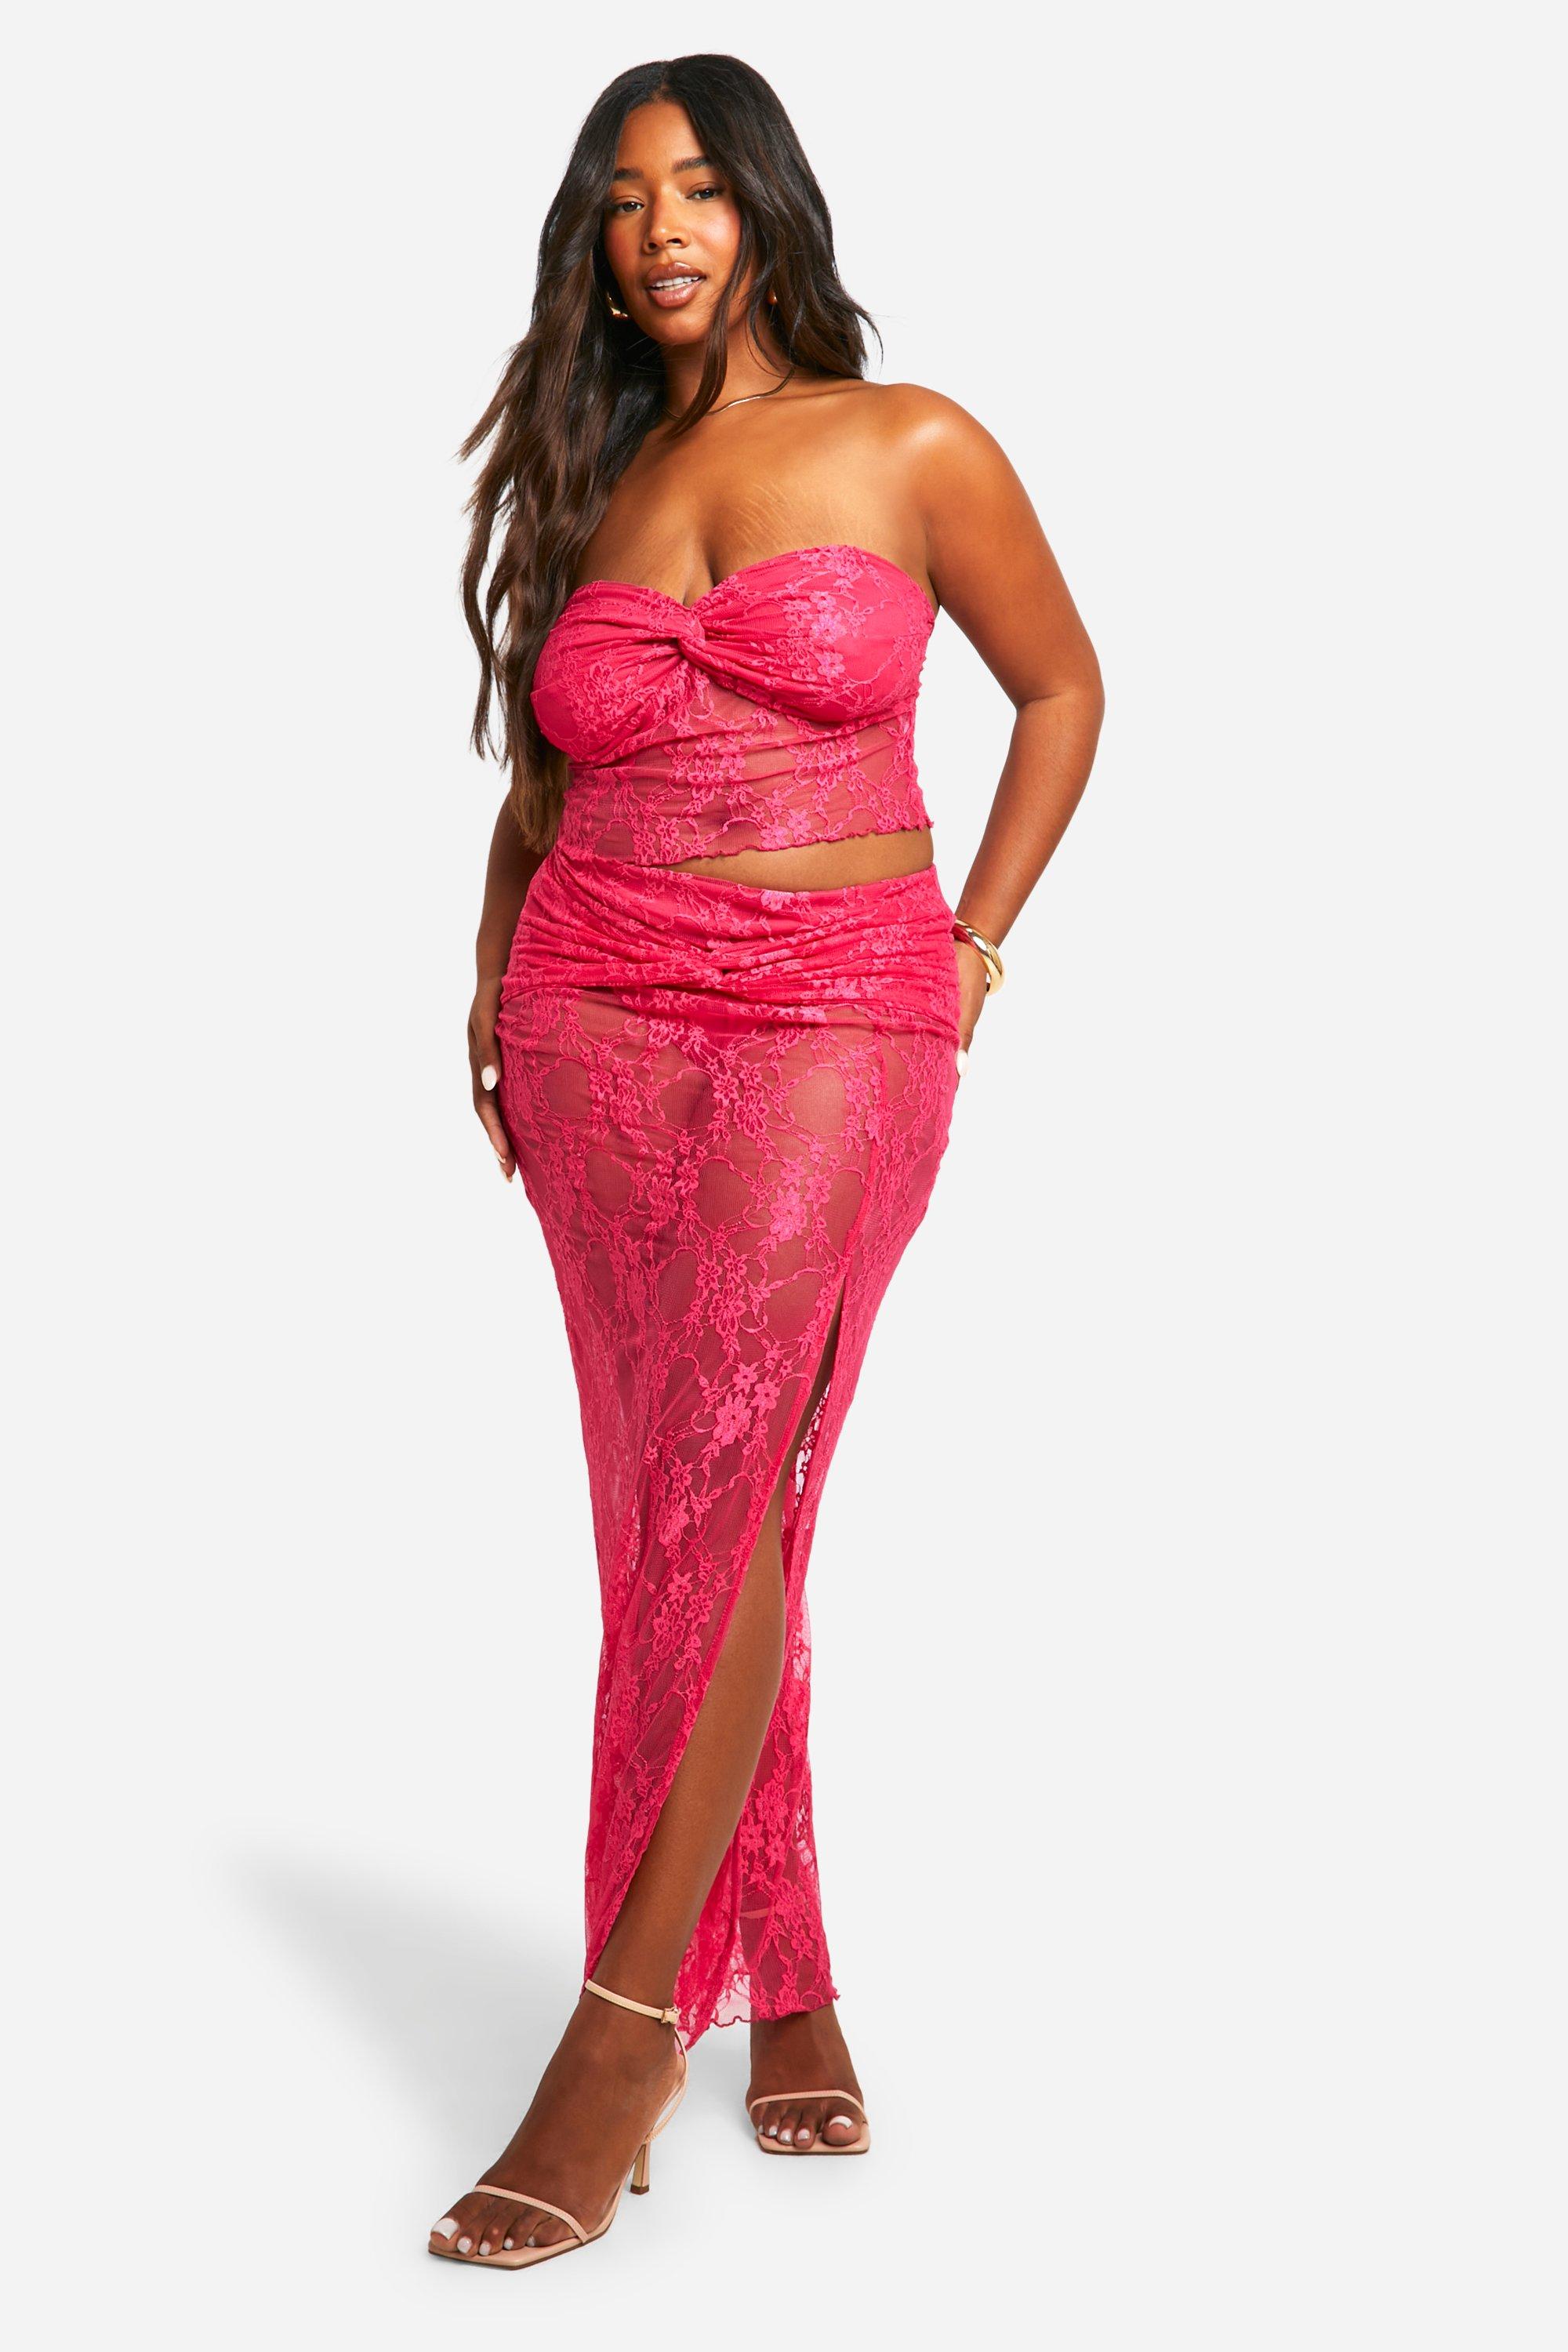 Boohoo Plus Lace Ruched Bandeau Top & Knot Detail Maxi Skirt Co-Ord, Hot Pink